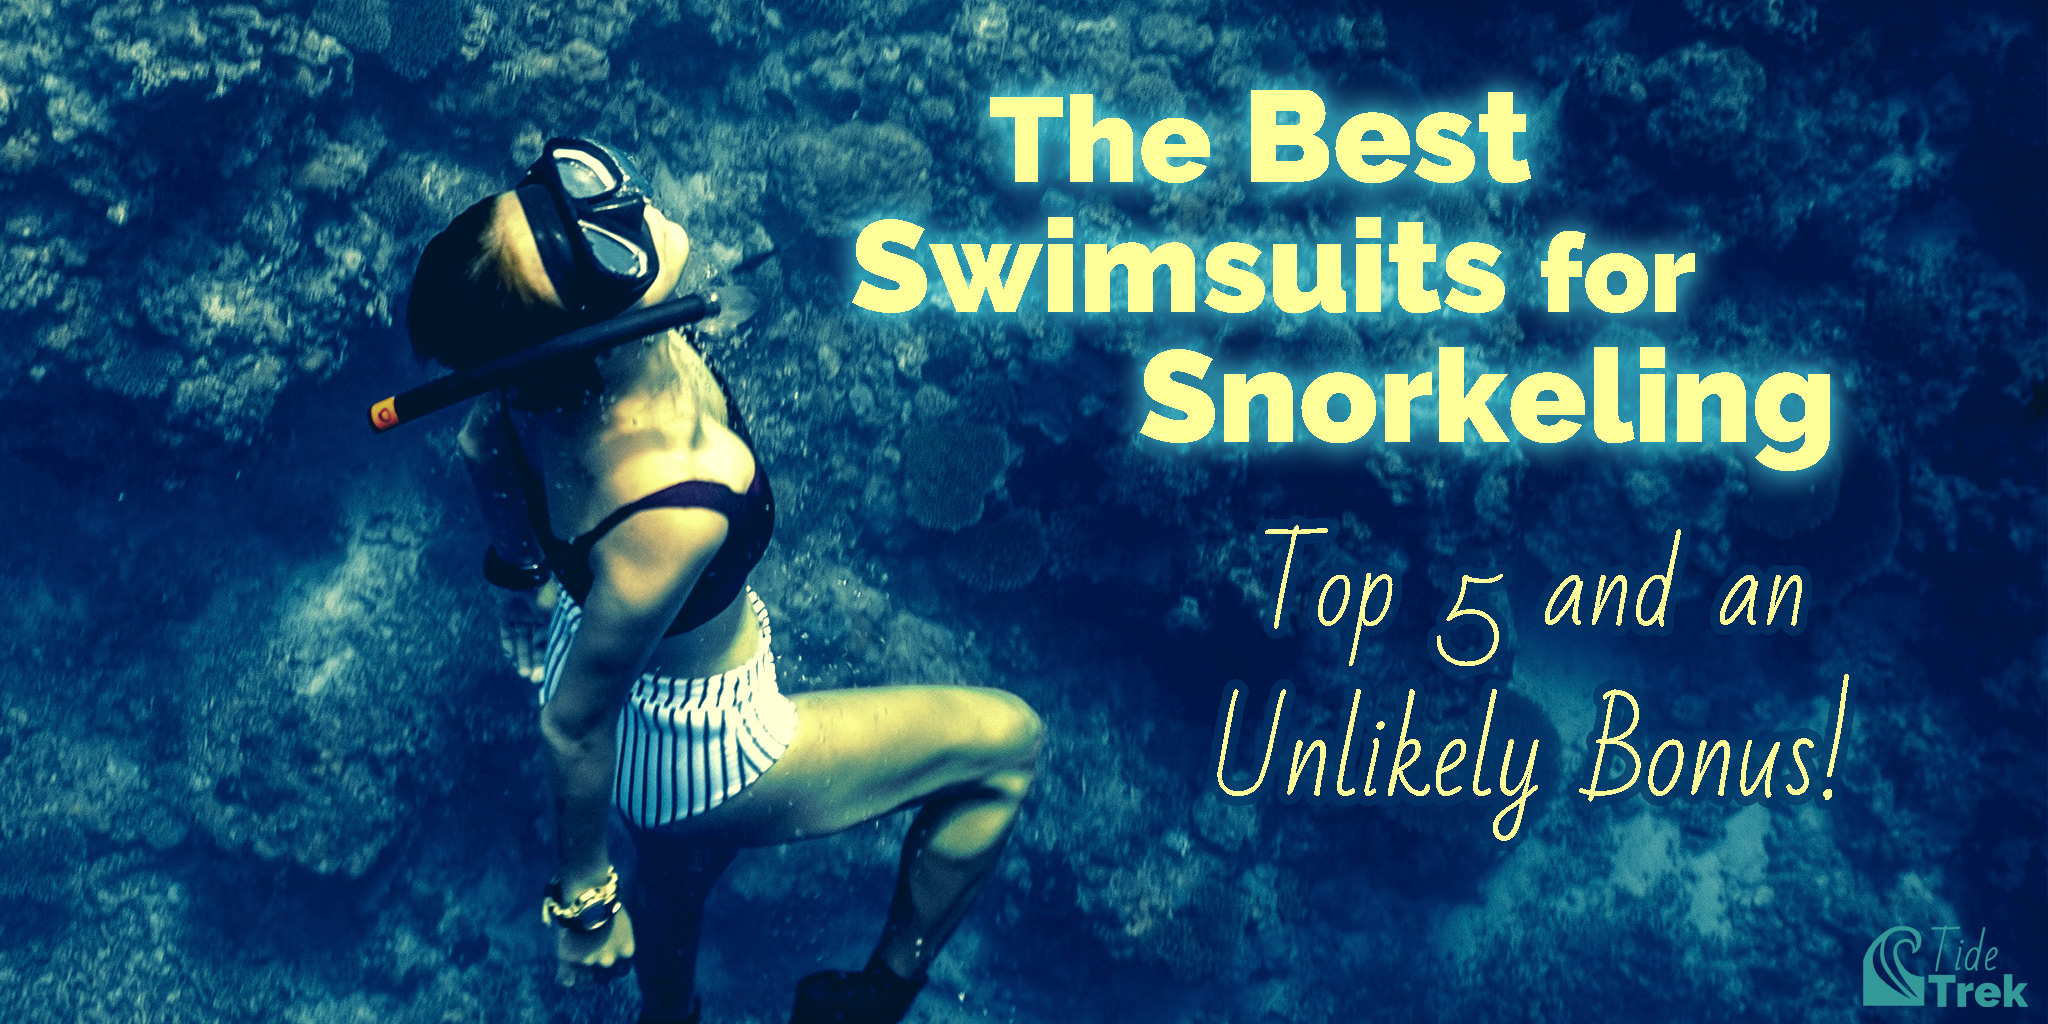 The best swimsuits for snorkeling. Top 5 and an unlikely bonus.